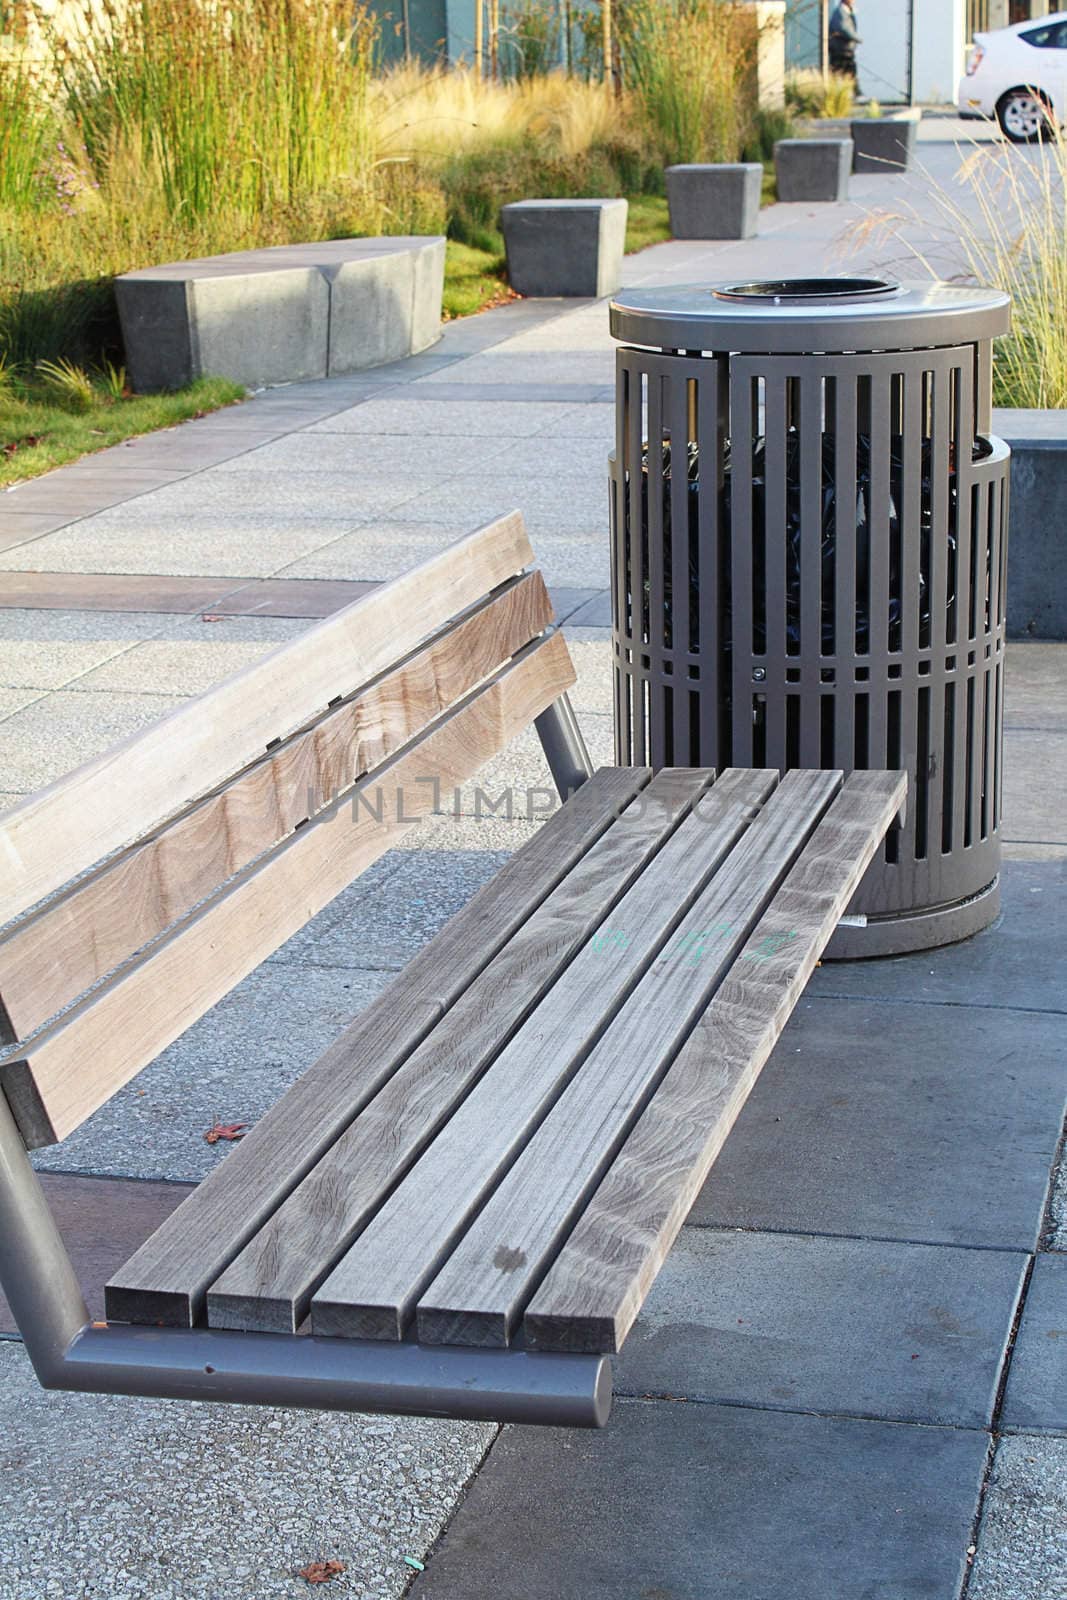 Bench on the town street